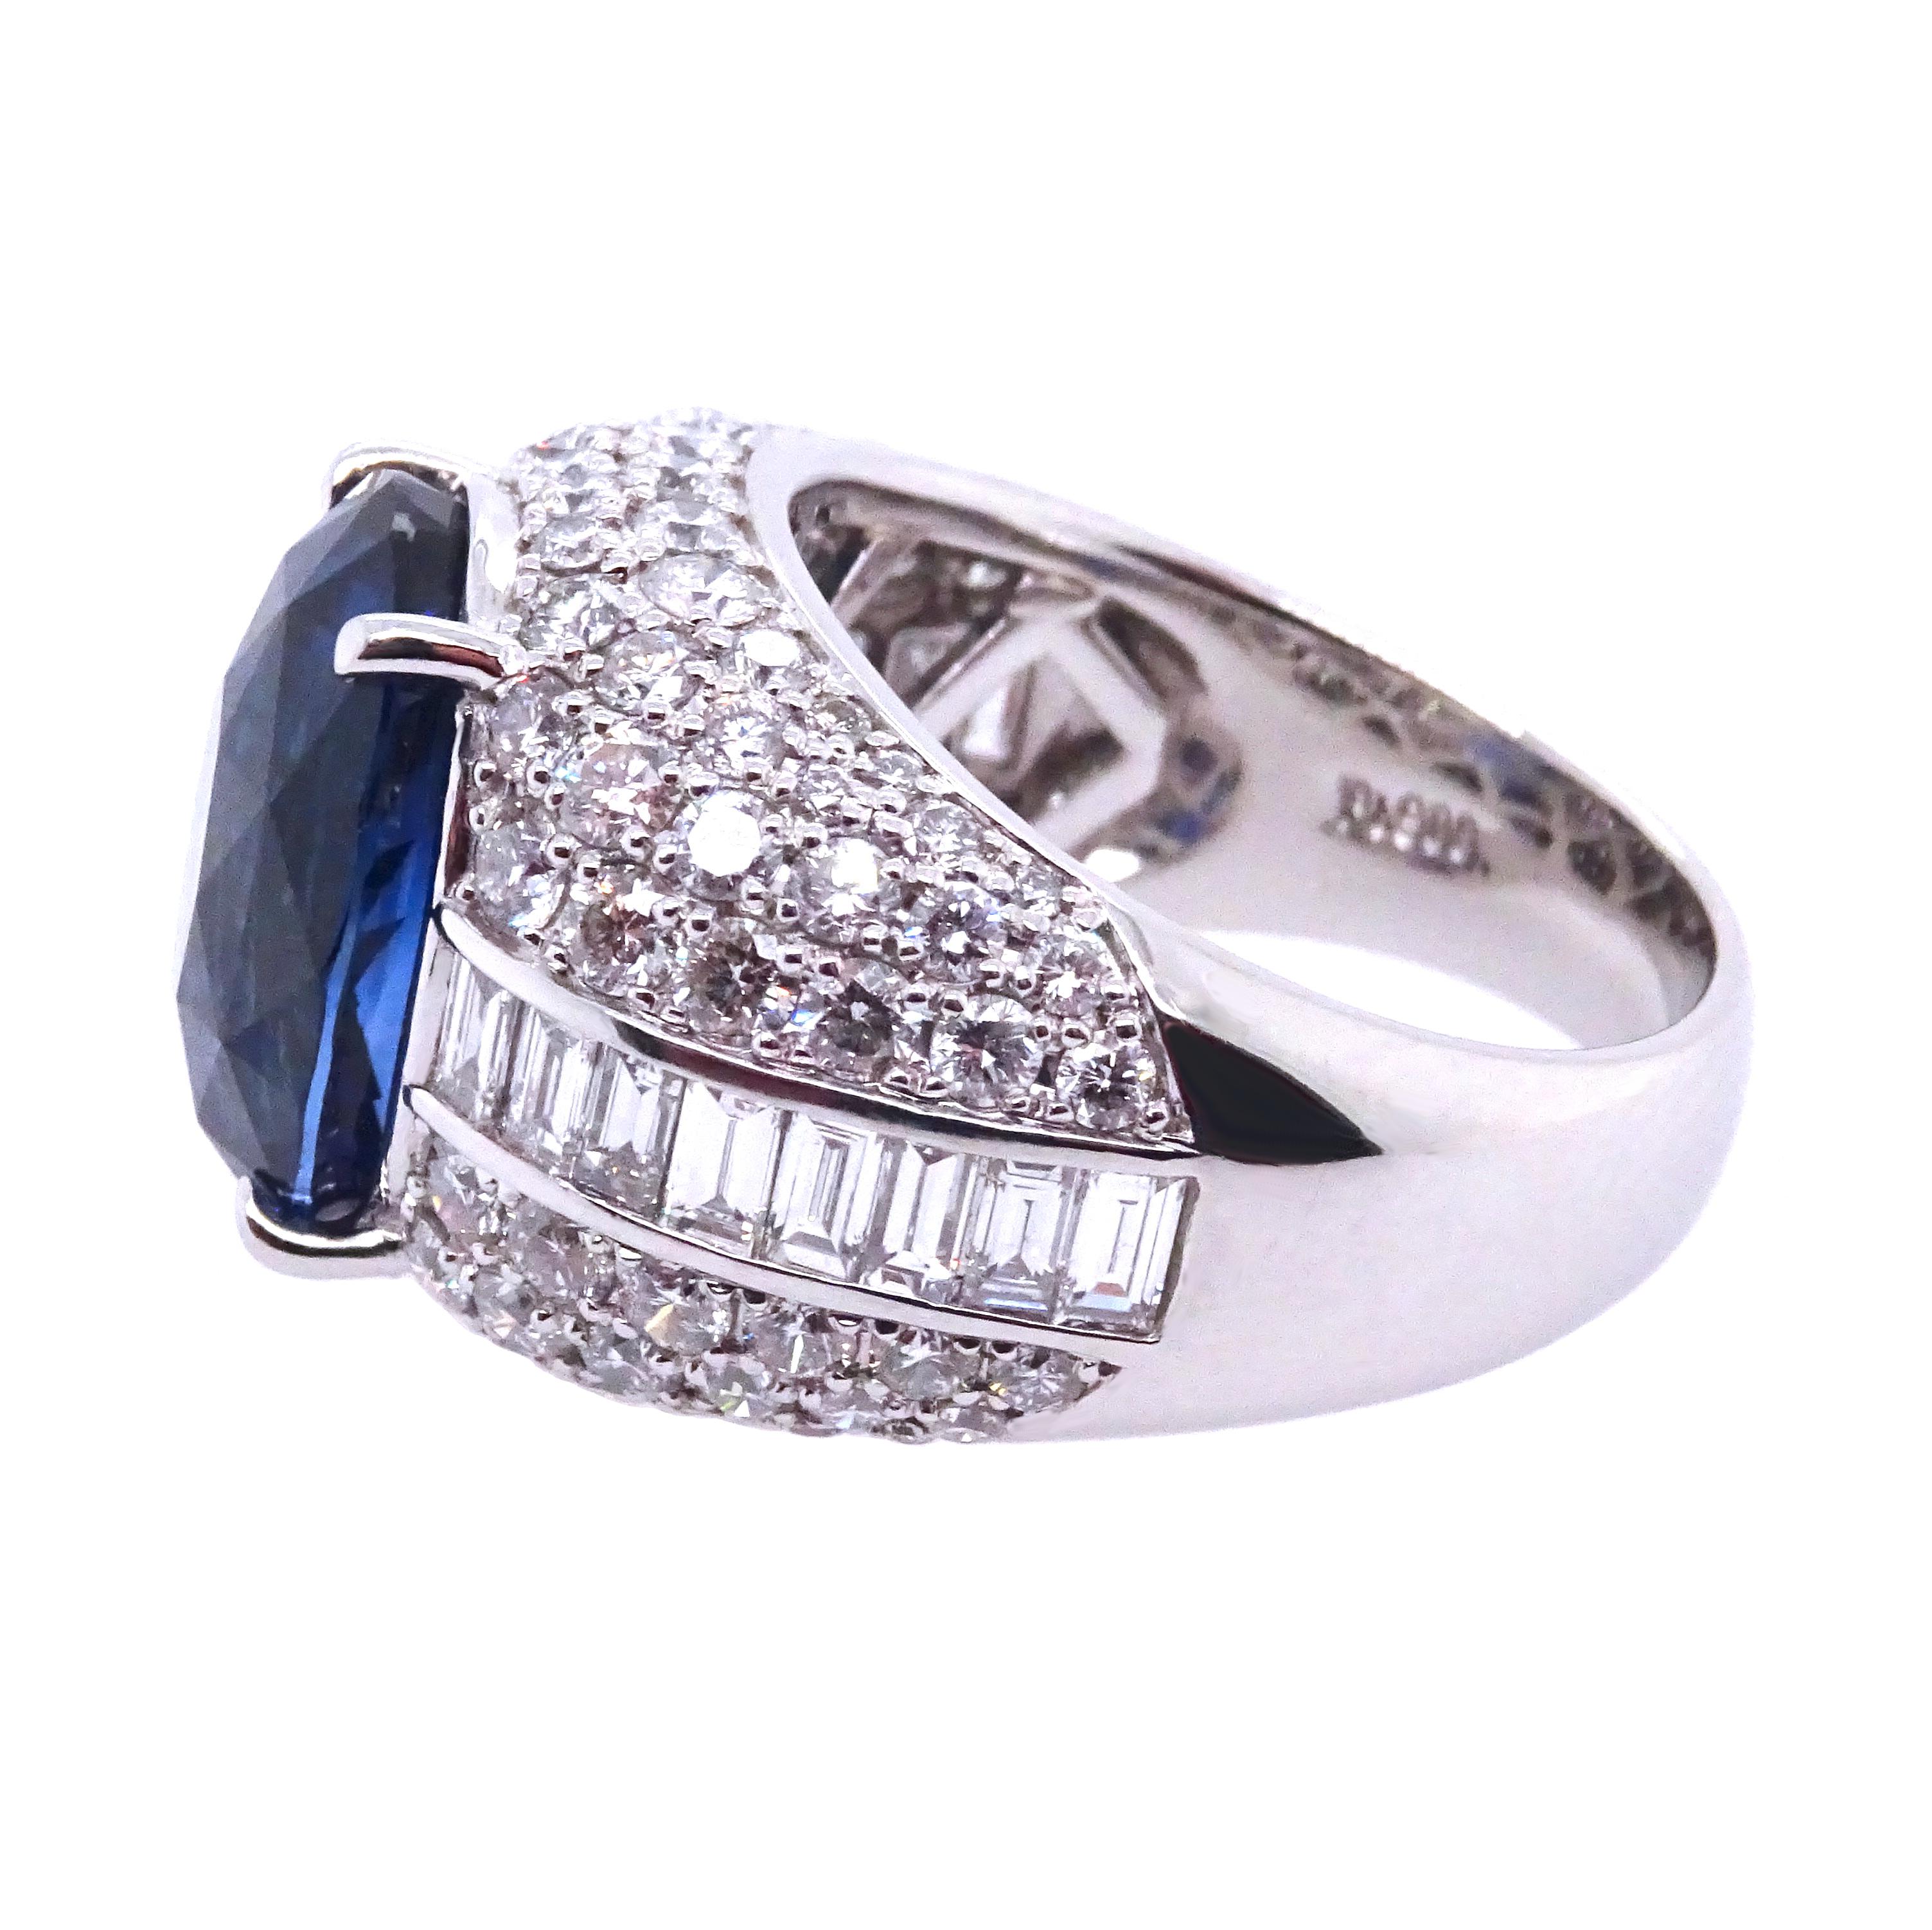 This breathtaking and exclusive sapphire ring showcases a vivid blue or royal blue sapphire of exceptional quality, ethically sourced from Sri Lanka, and comes with a prestigious GRS certificate guaranteeing its authenticity and origin. The sapphire